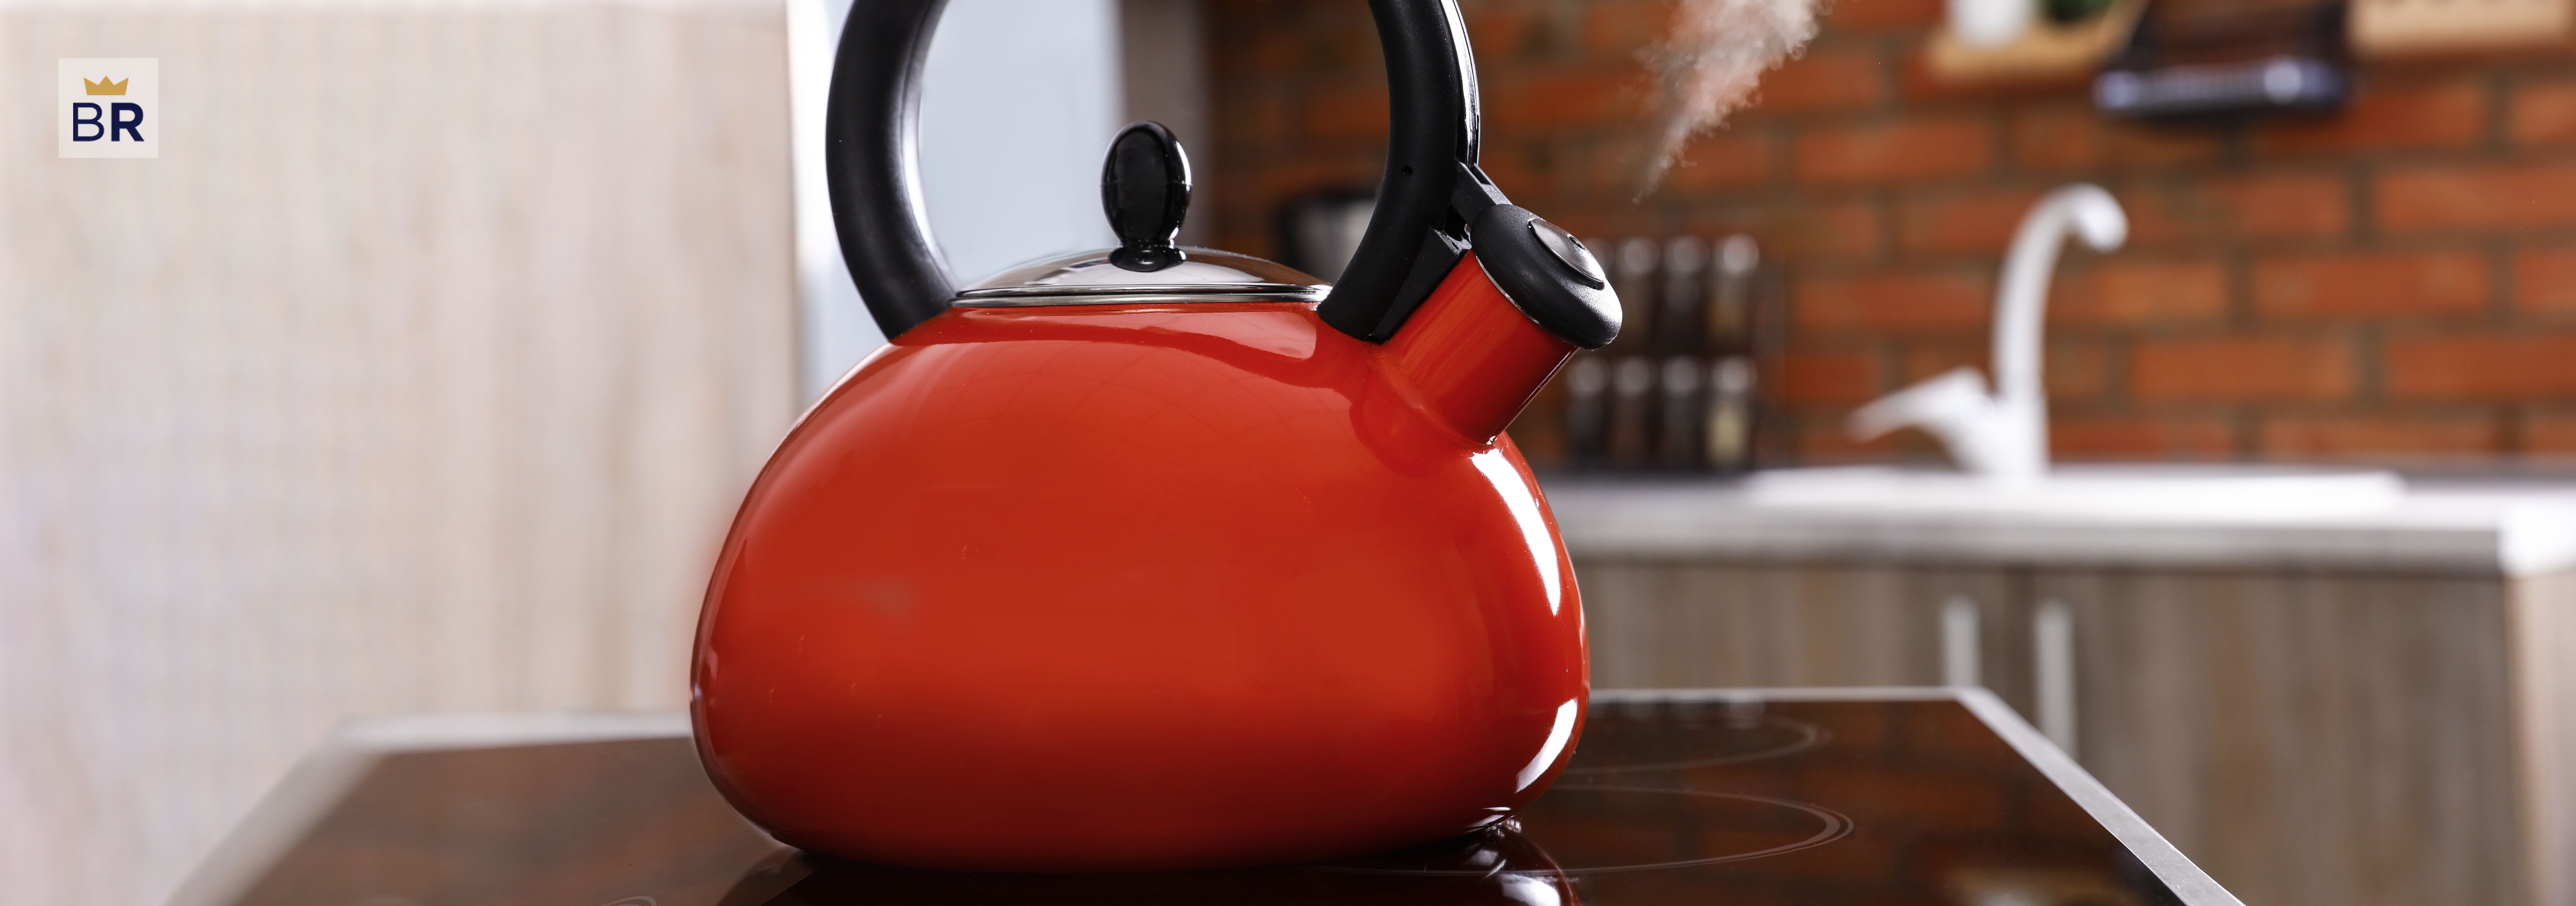 All-Clad E86199 Tea Kettle Overview - In The Kitchen